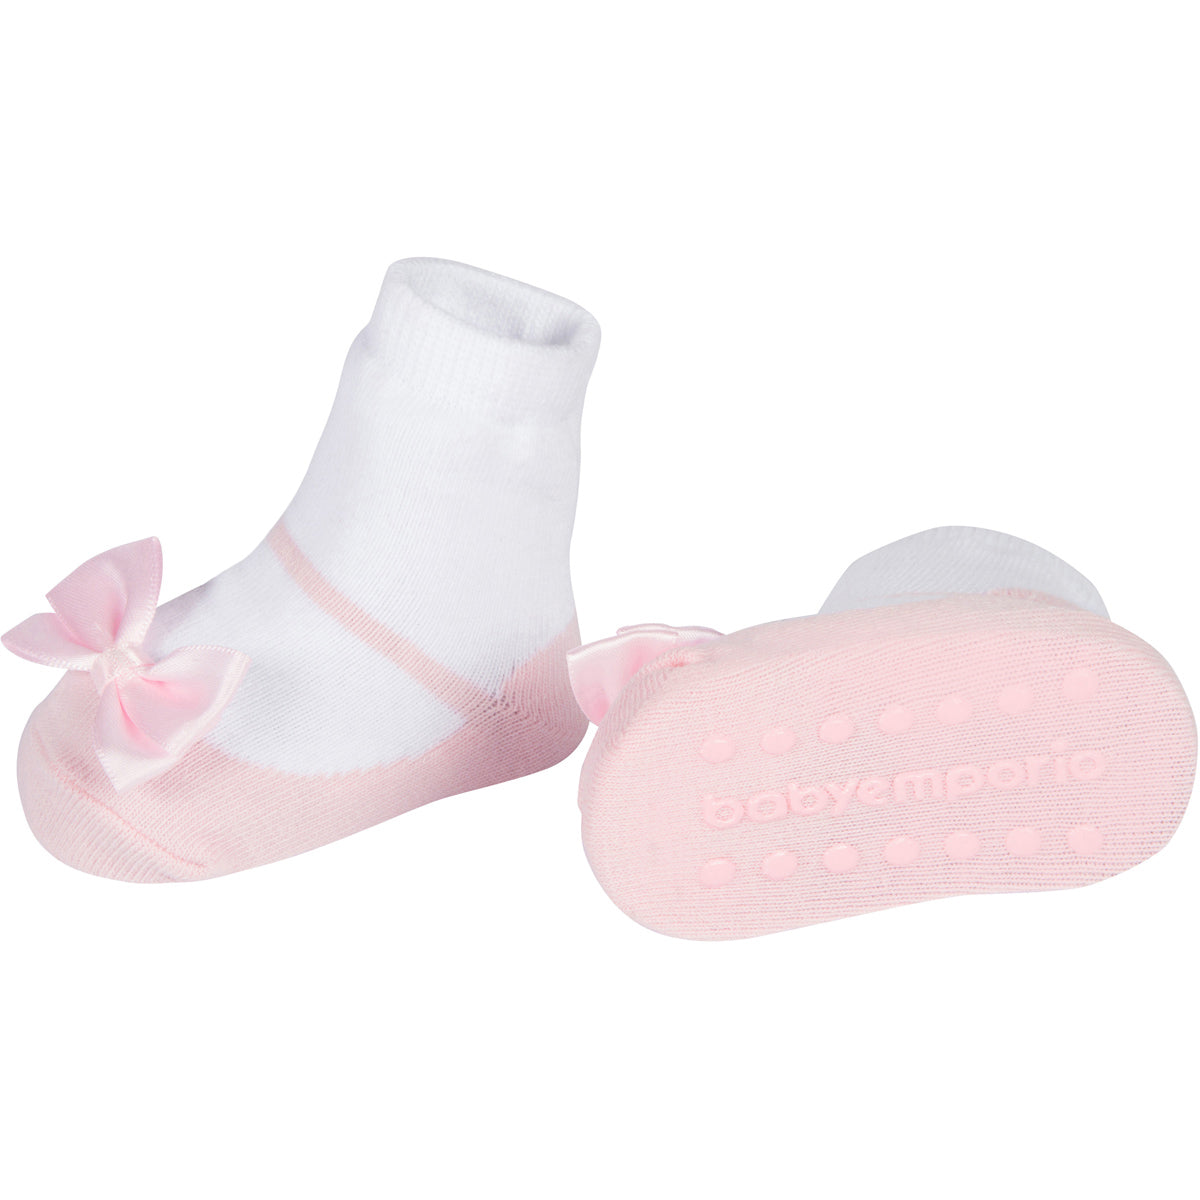 Baby Emporio  Toddler girl socks 12-24 months,with nearly invisible anti-slip soles matching the socks pink sole color